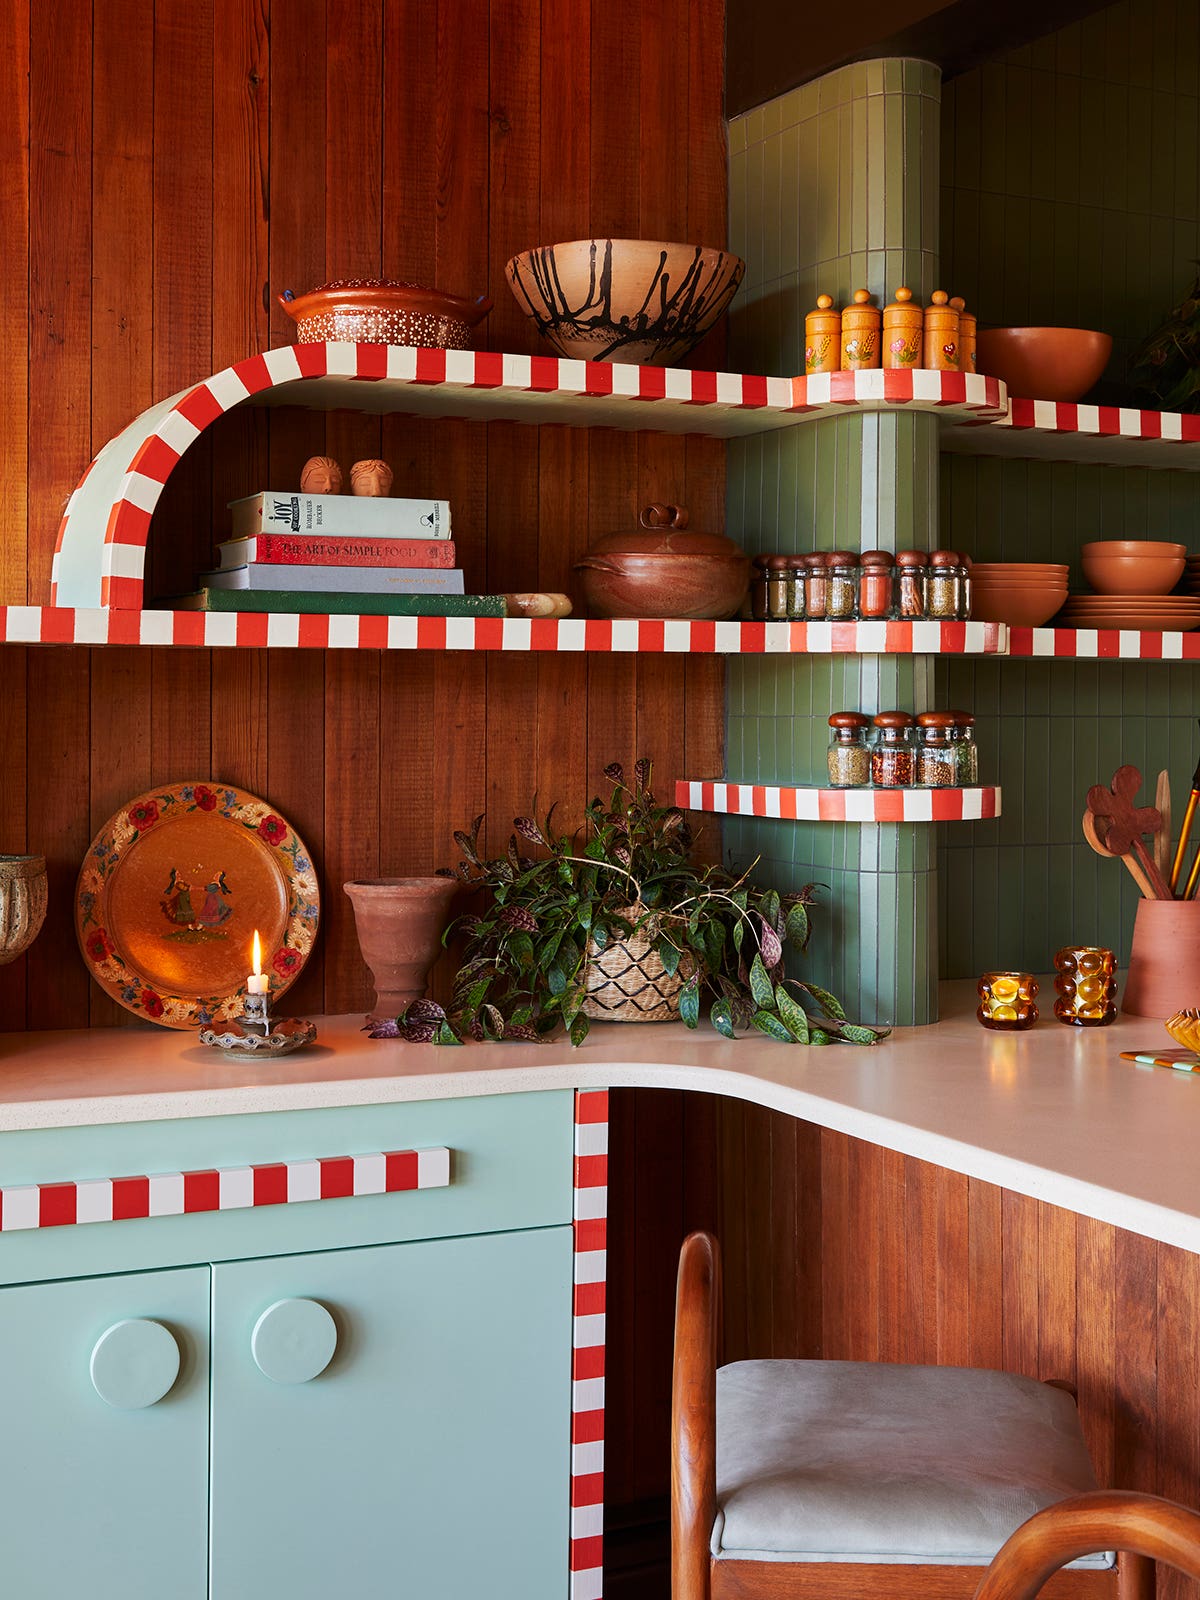 A Had-to-Stay Post in This Playful Kitchen Made Way for Cool Curved Spice Storage